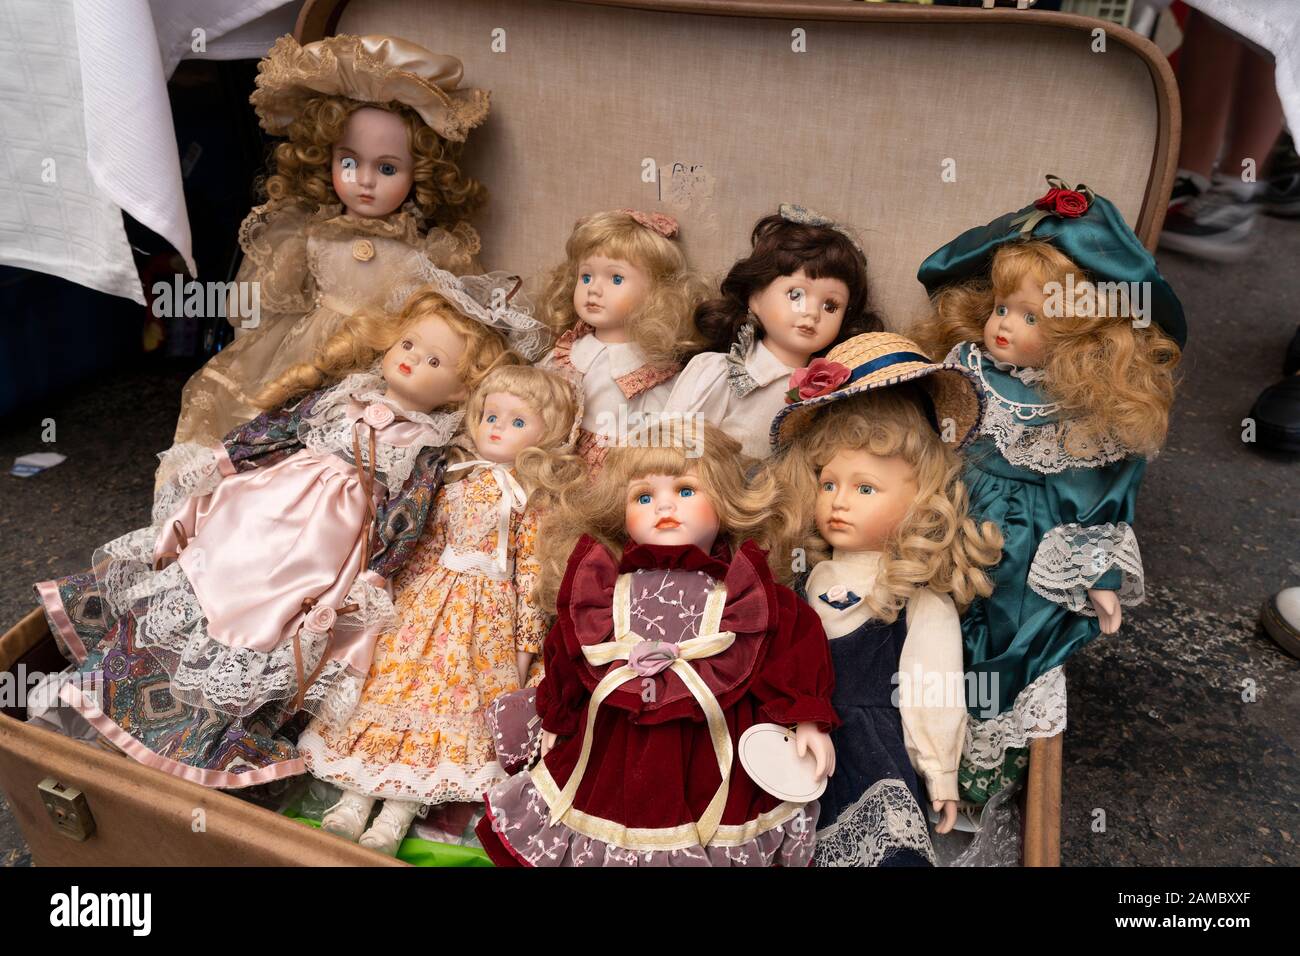 Old dolls from many years ago Stock Photo - Alamy